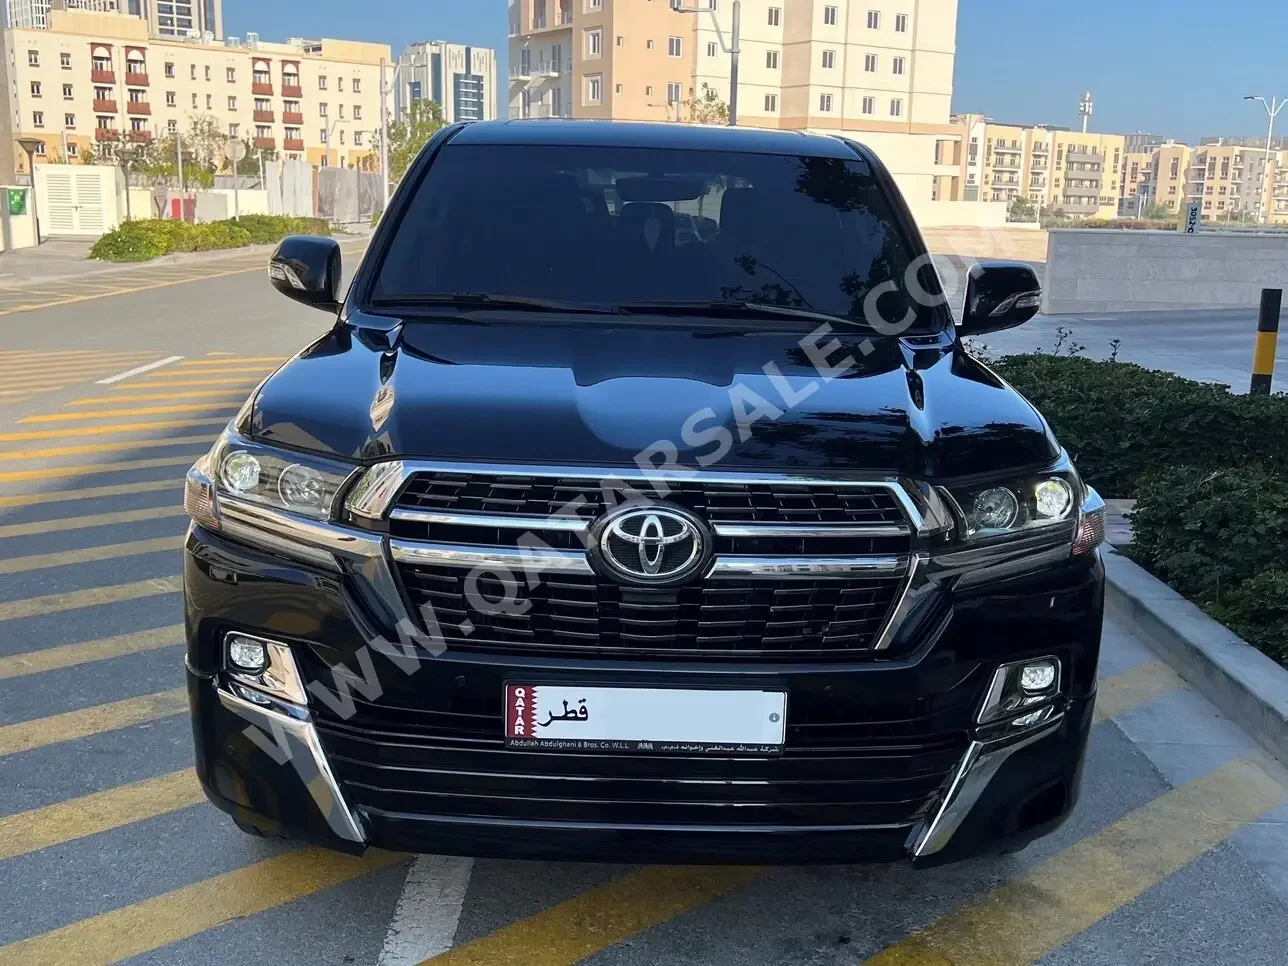 Toyota  Land Cruiser  GXR- Grand Touring  2021  Automatic  72,000 Km  8 Cylinder  Four Wheel Drive (4WD)  SUV  Black